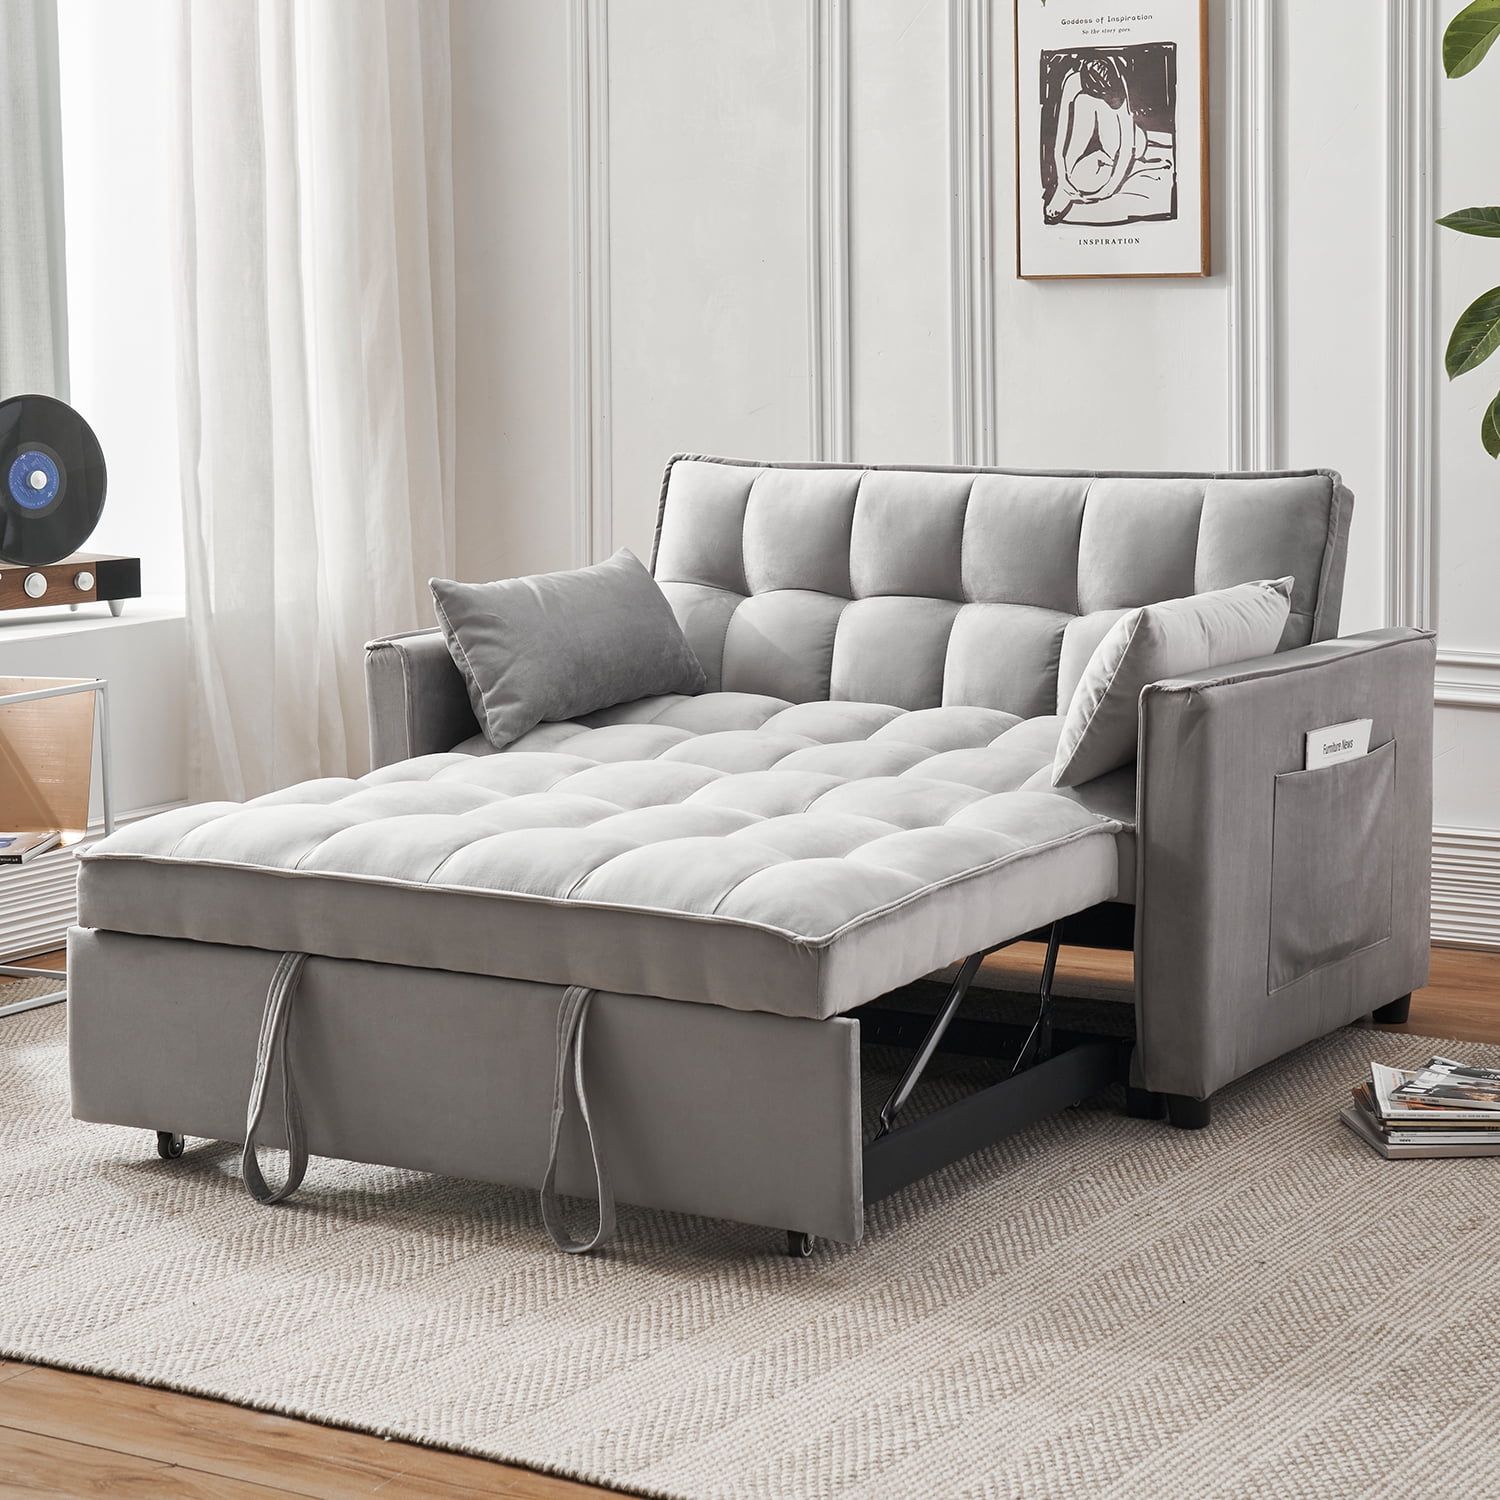 Tzicr 55.5'' 3 In 1 Convertible Sleeper Sofa Bed, Modern Velvet Loveseat  Futon Couch Pullout Bed With Adjustable Backrest, Side Storage Pockets And  Pillows. (grey) – Walmart Regarding 3 In 1 Gray Pull Out Sleeper Sofas (Photo 5 of 15)